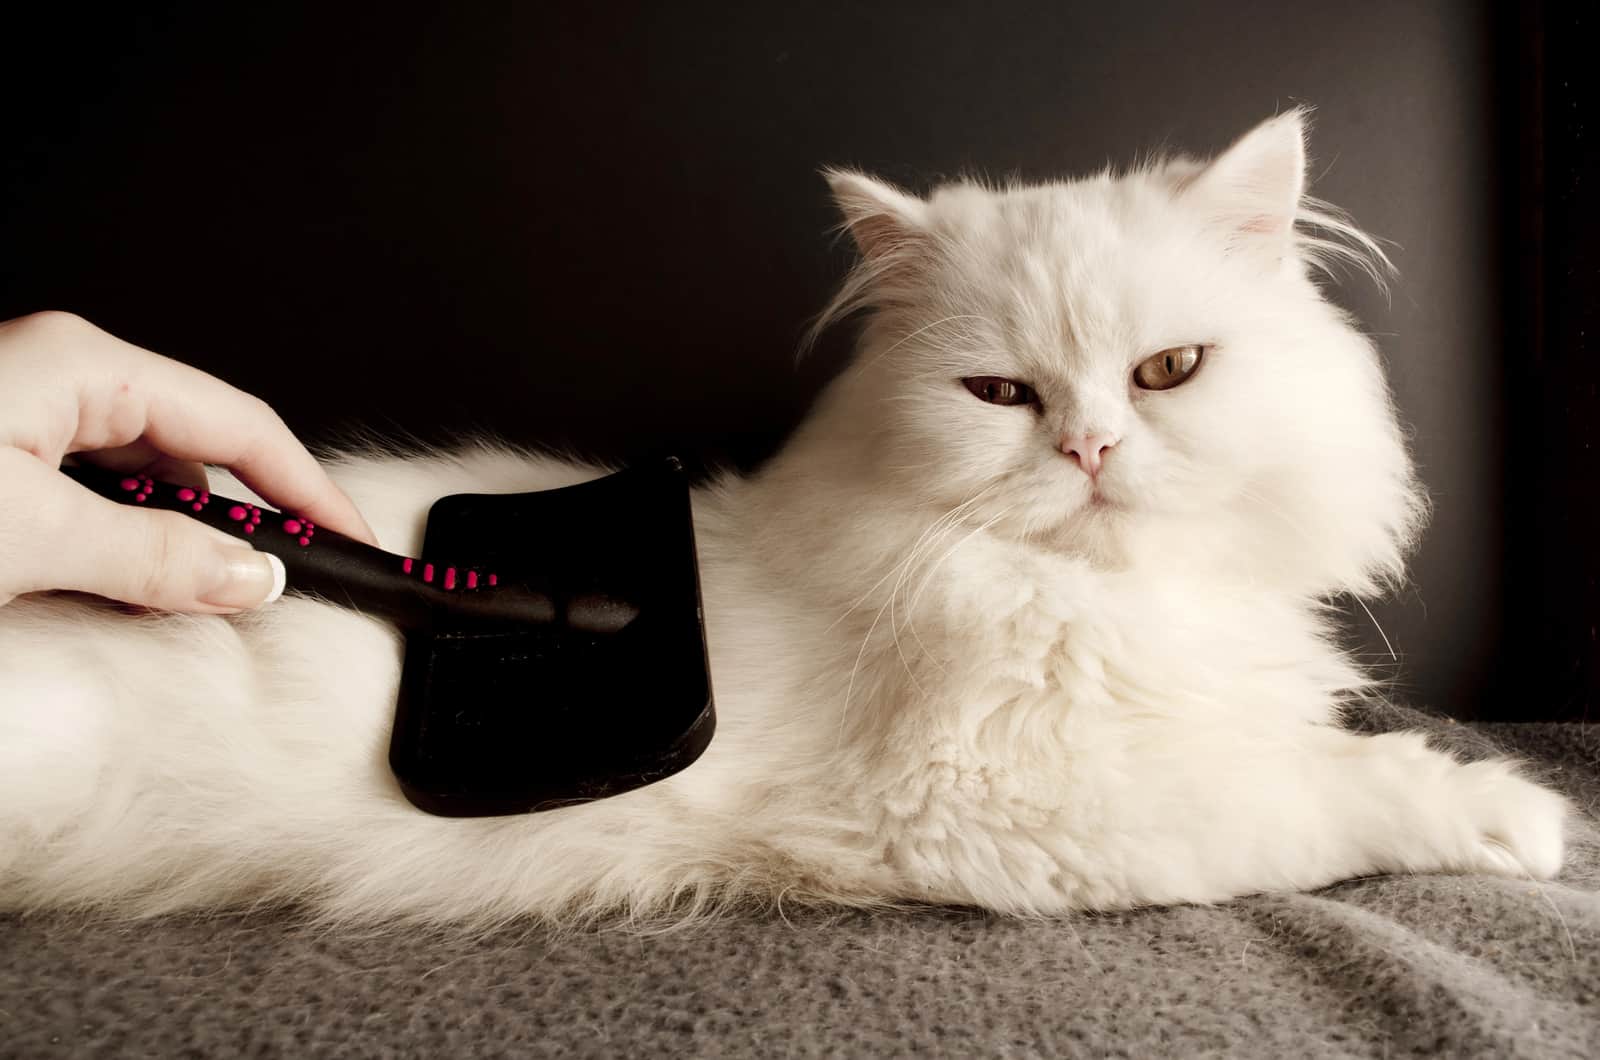 Woman combing fur of a white Persian cat